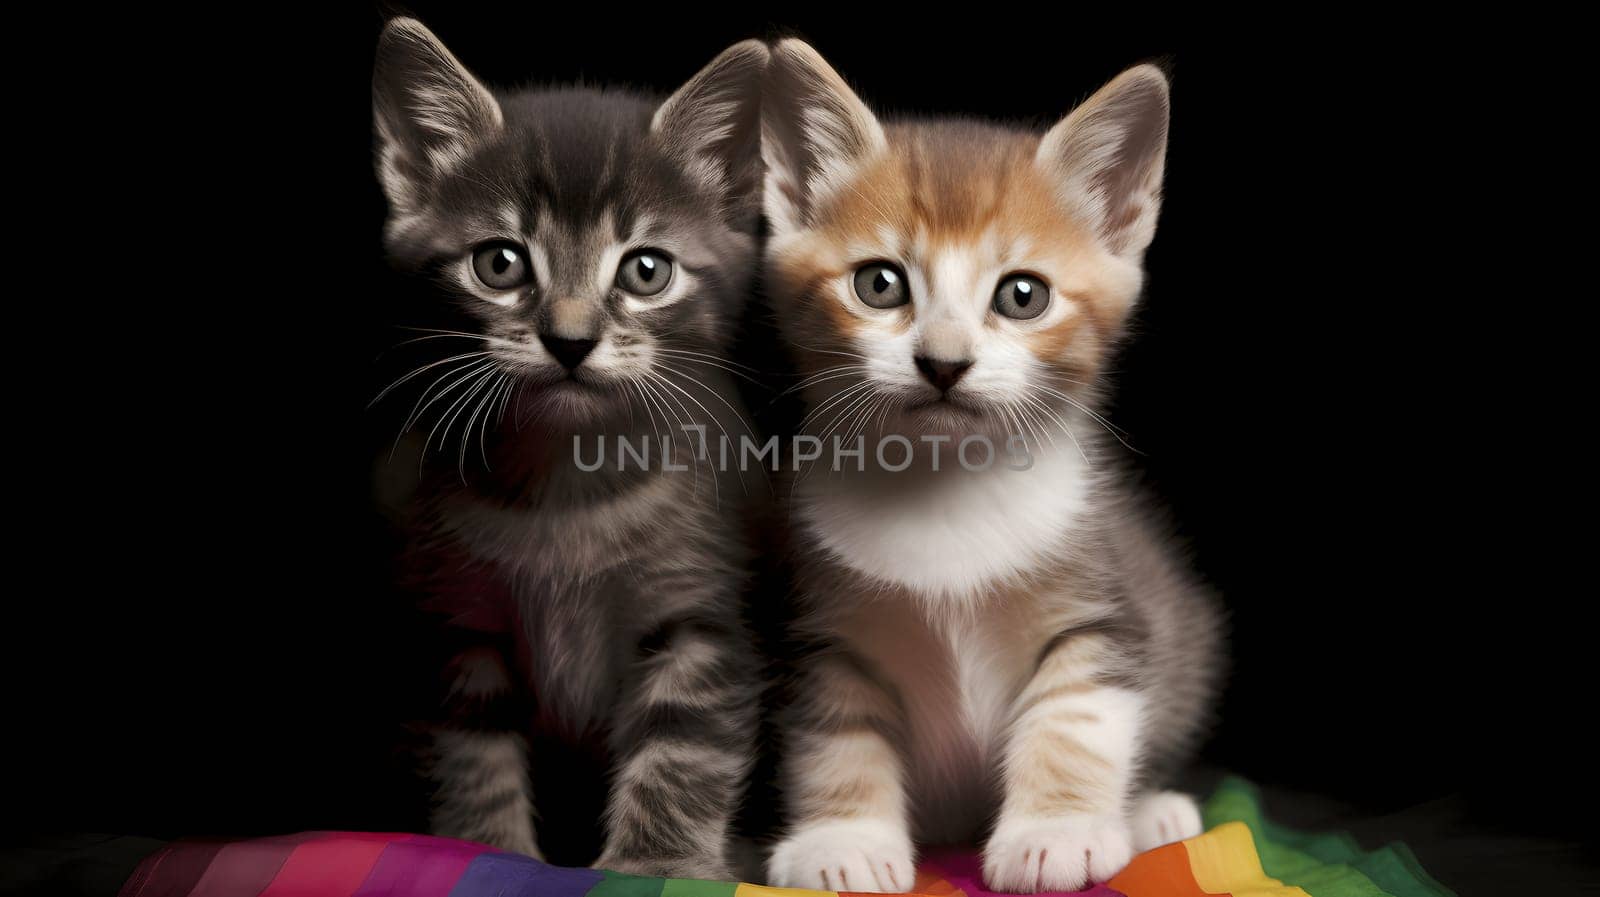 pair of kittens on rainbow LGBT flag. Neural network generated in May 2023. Not based on any actual scene or pattern.